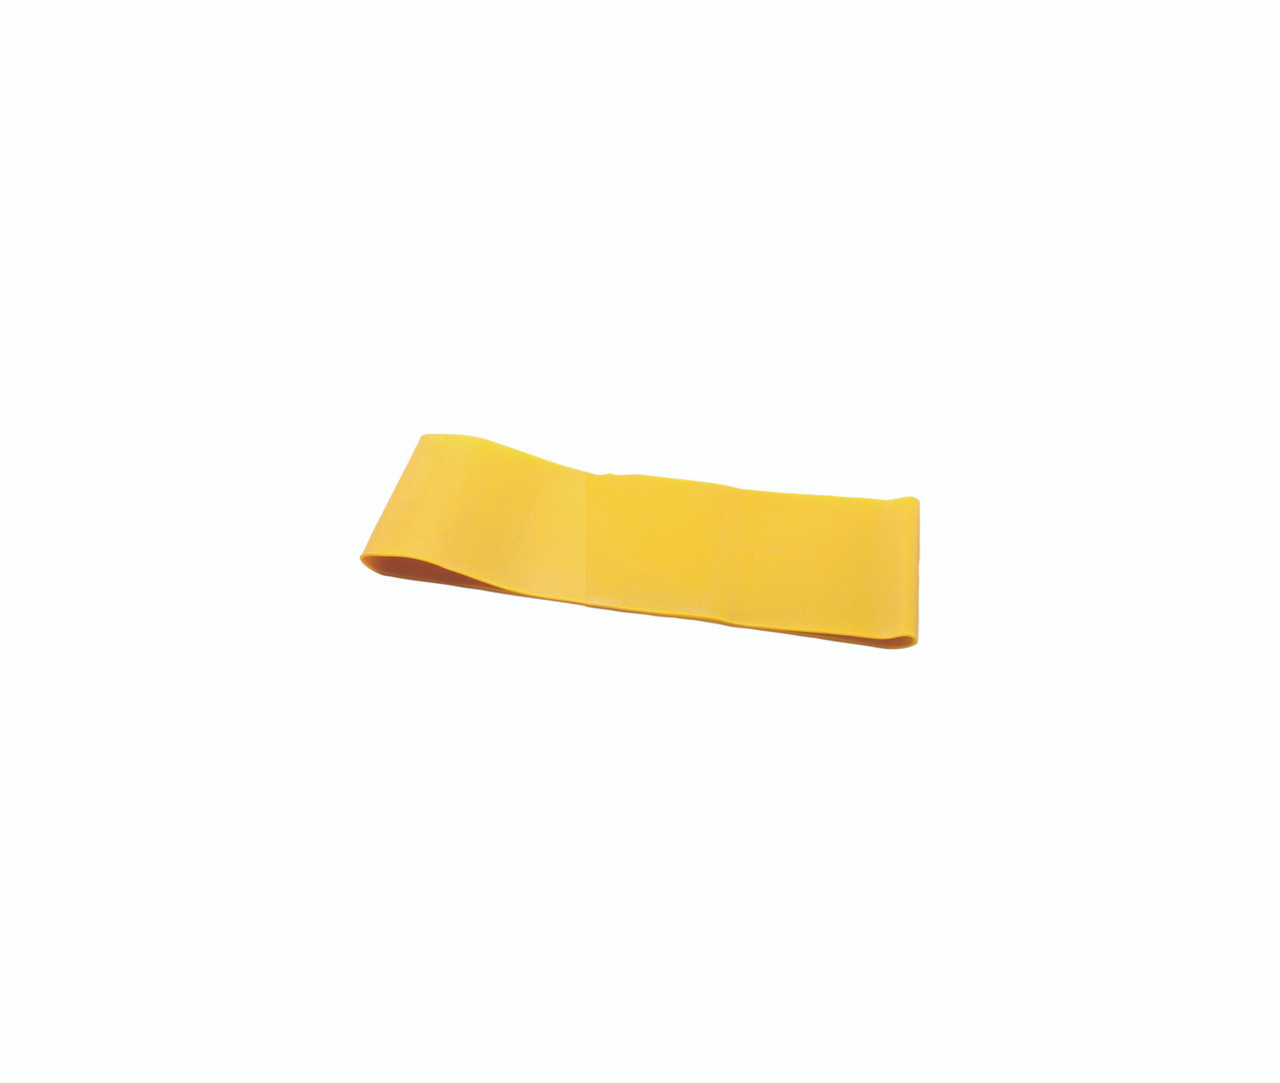 CanDo¨ Band Exercise Loop - 10" Long - Yellow - x-light